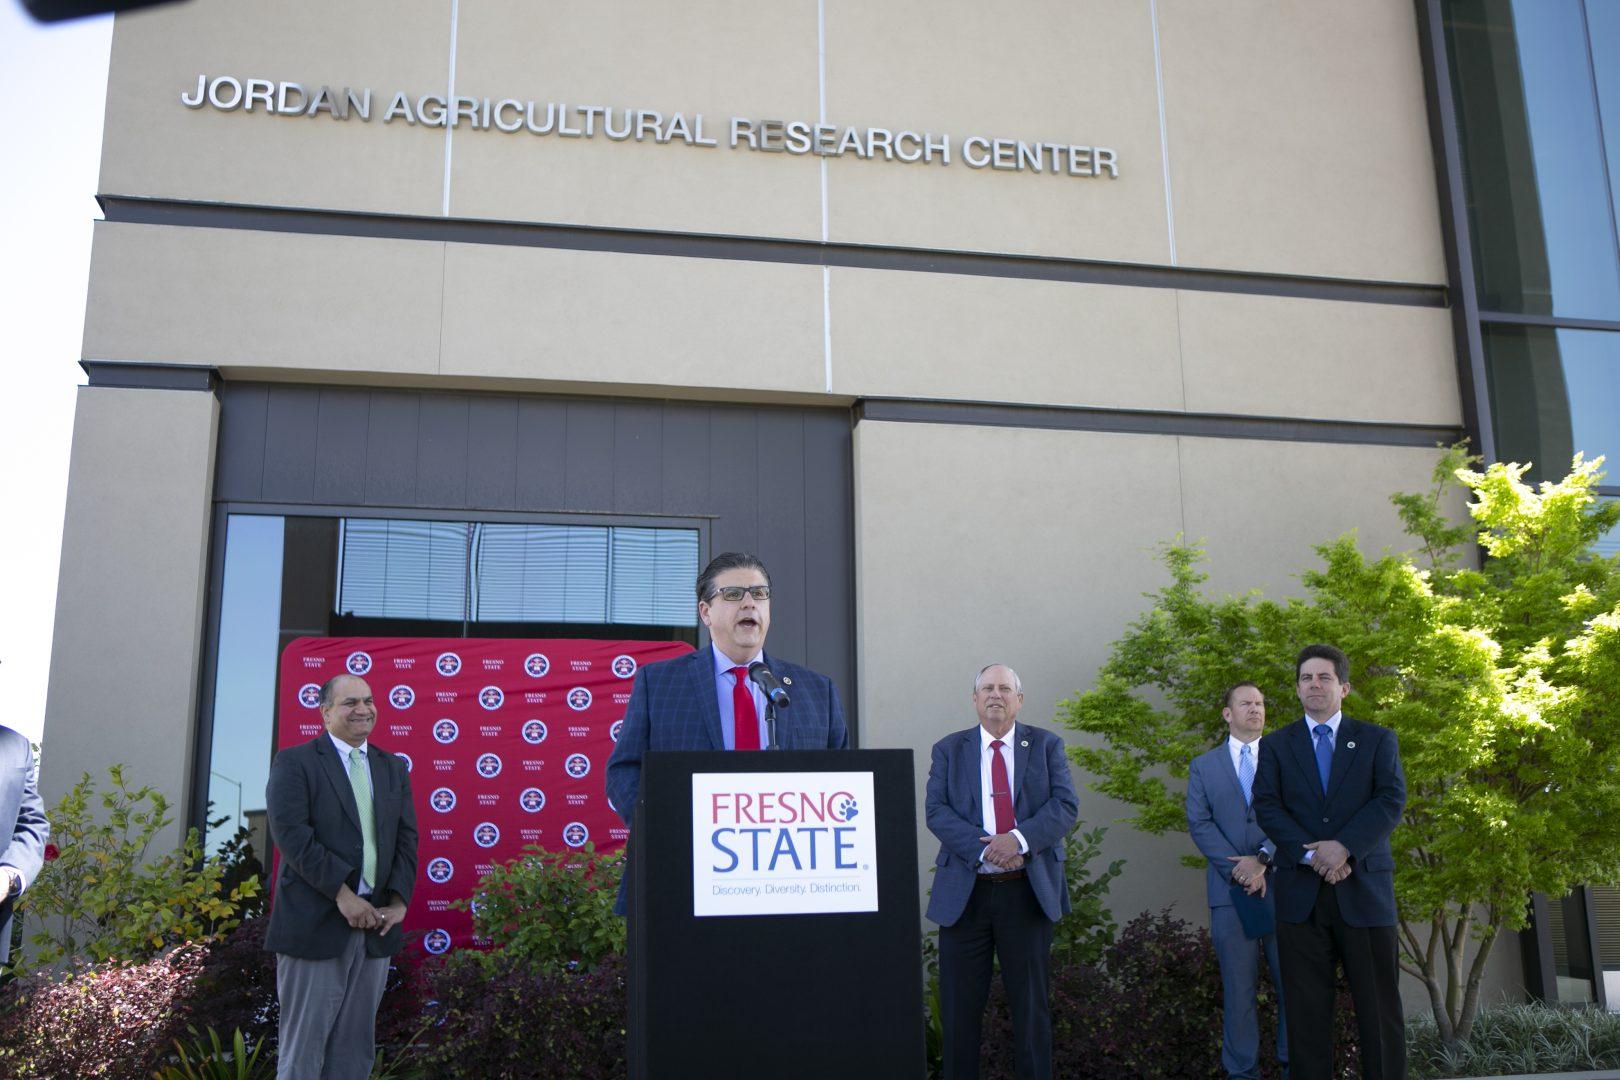 Fresno State President Dr. Joseph I. Castro announces the new temporary COVID-19 public lab as part of a partnership with Fresno county in front of the Jordan Agricultural Research Center on Tuesday, April 14, 2020. (Larry Valenzuela/ The Collegian)